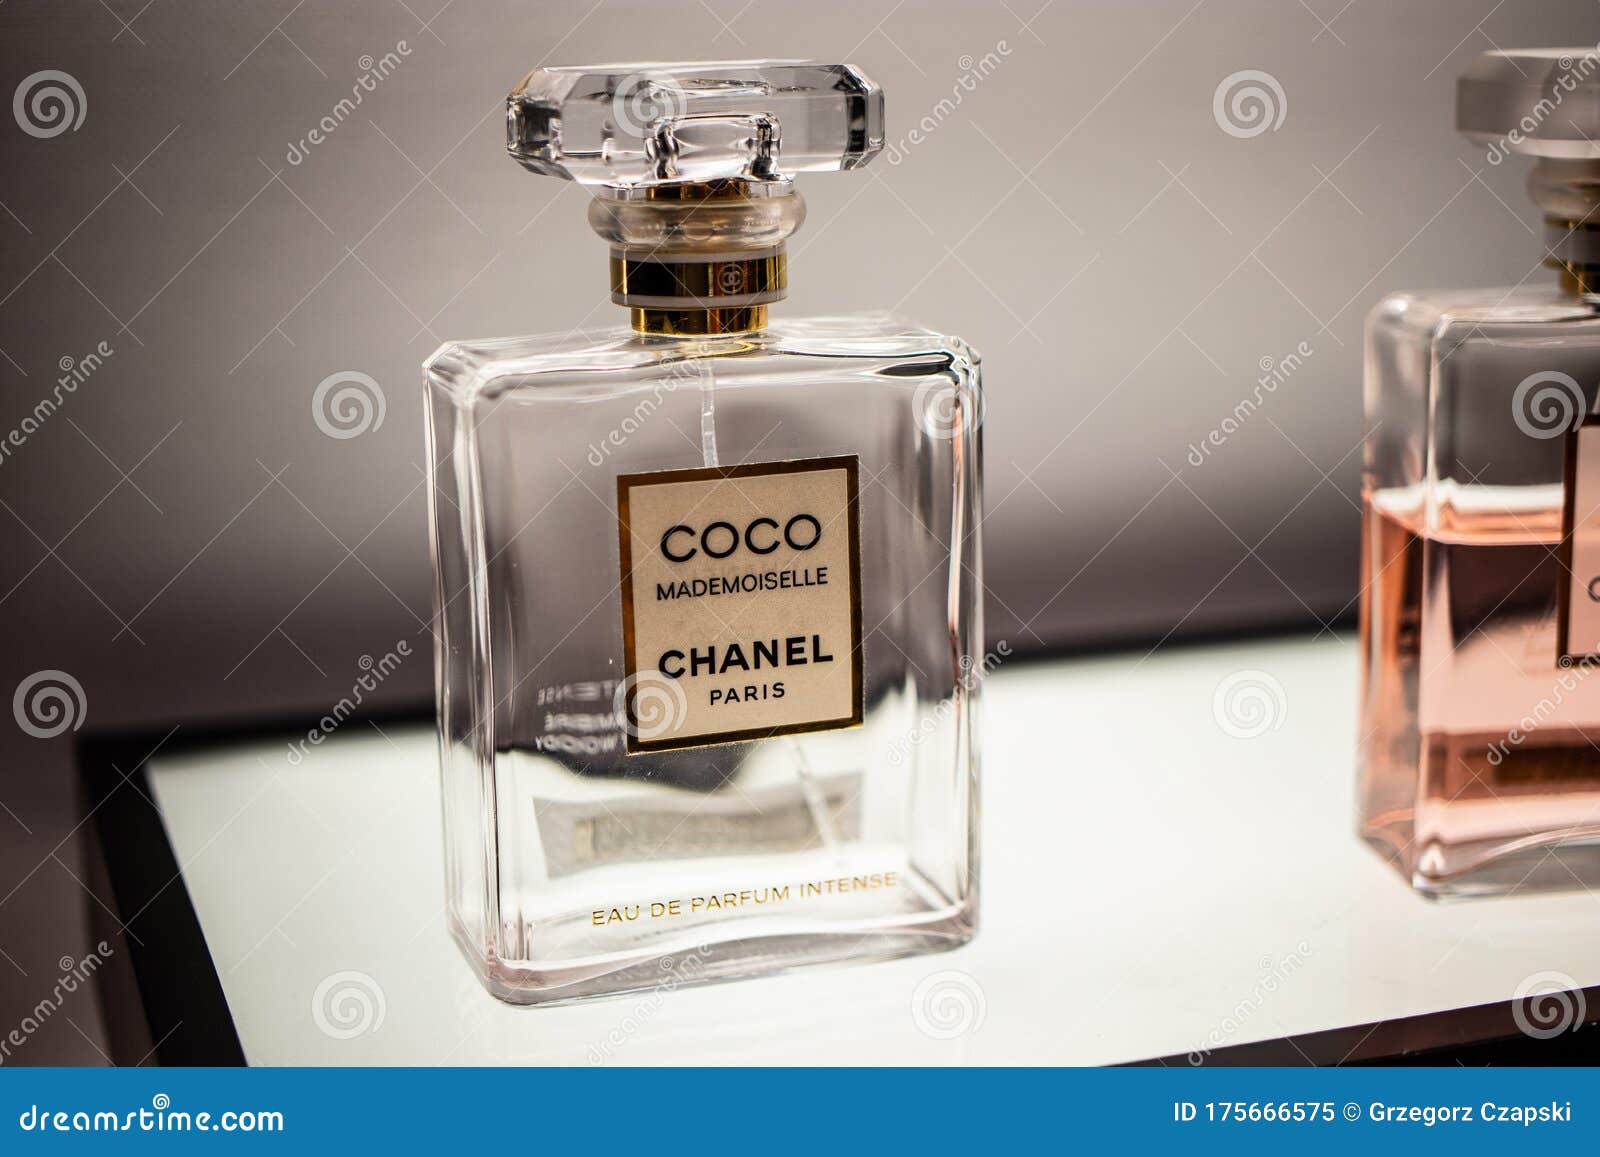 French Perfume Chanel Coco Mademoiselle Editorial Stock Photo